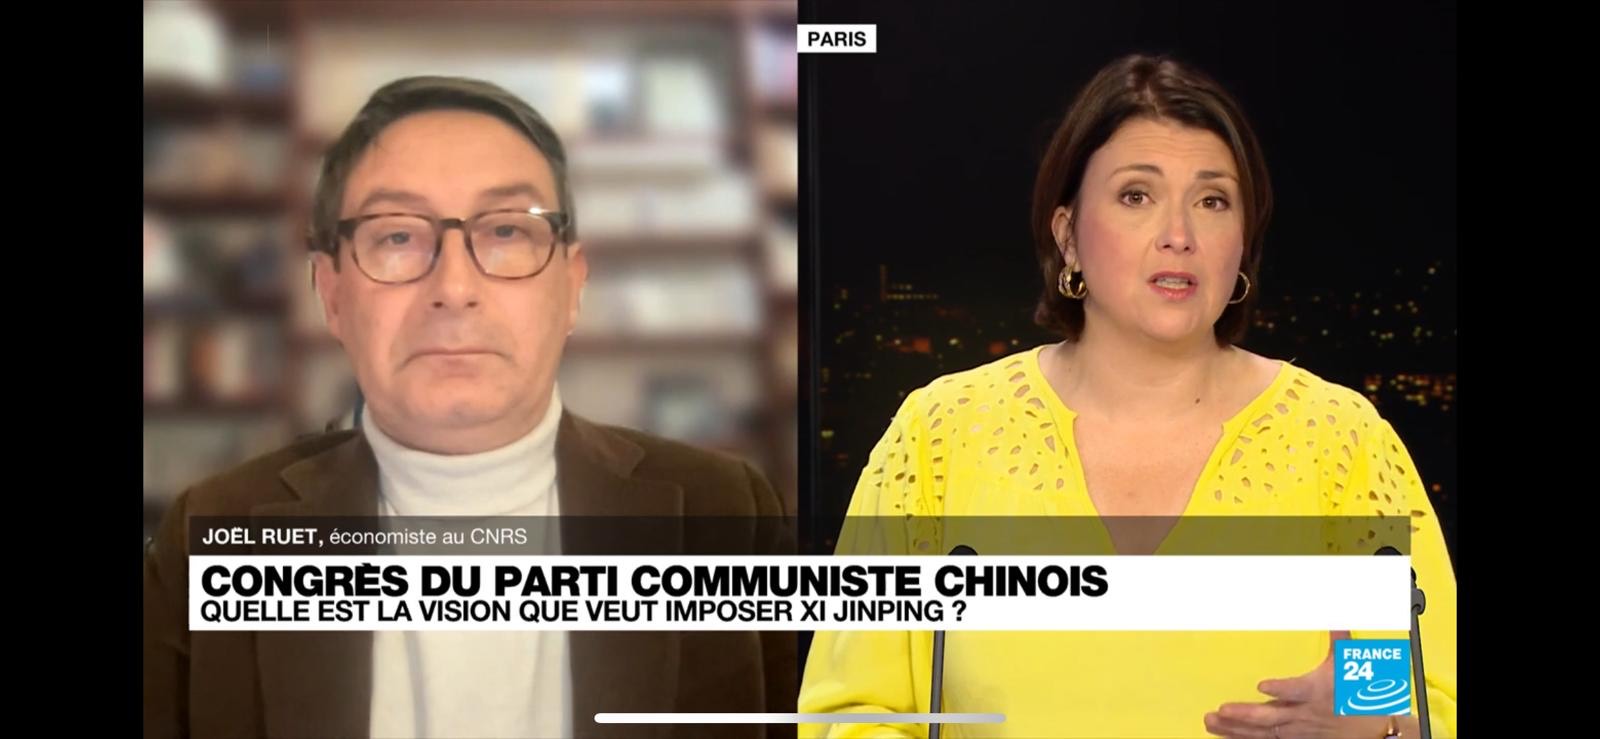 France 24 – Joël Ruet speaks on the 2021 Chinese Communist Party Congress and Chinese economic difficulties